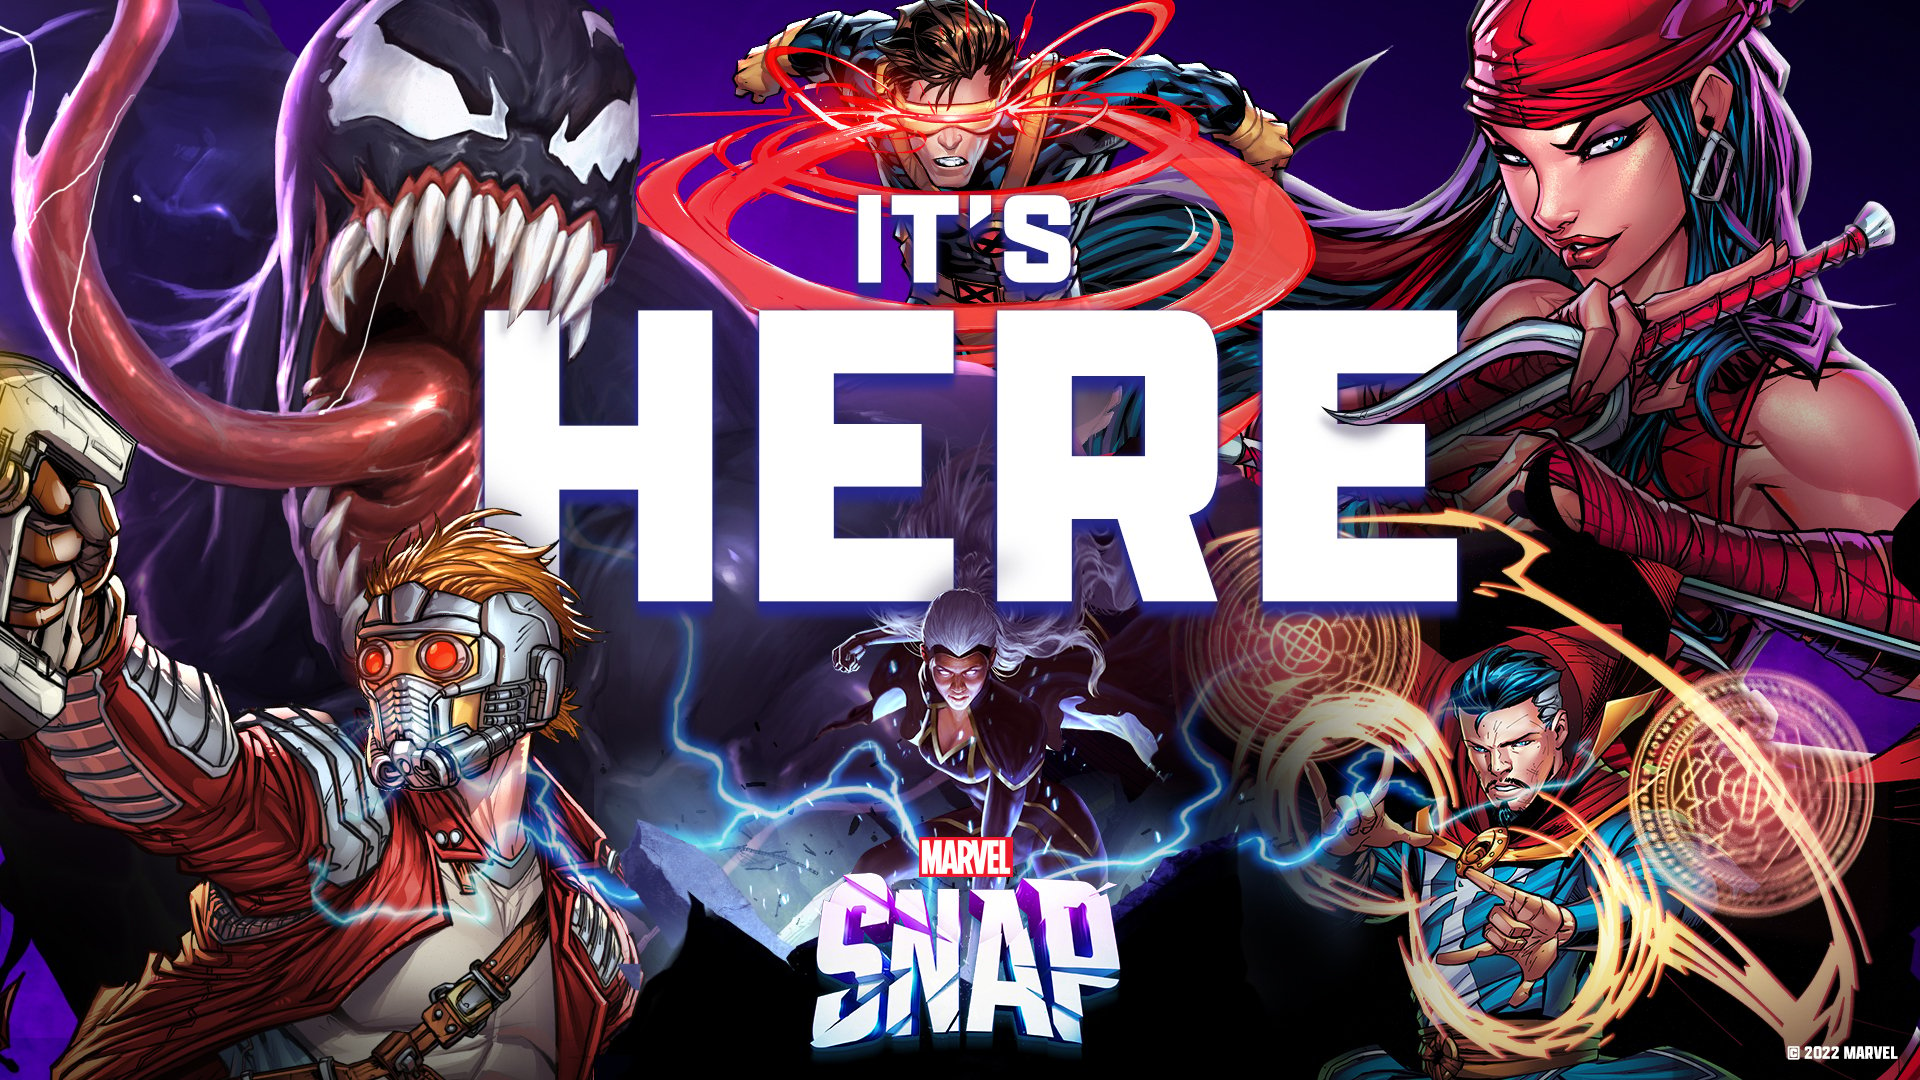 Marvel Snap Zone on X: With the #MarvelSnap Series Drop just